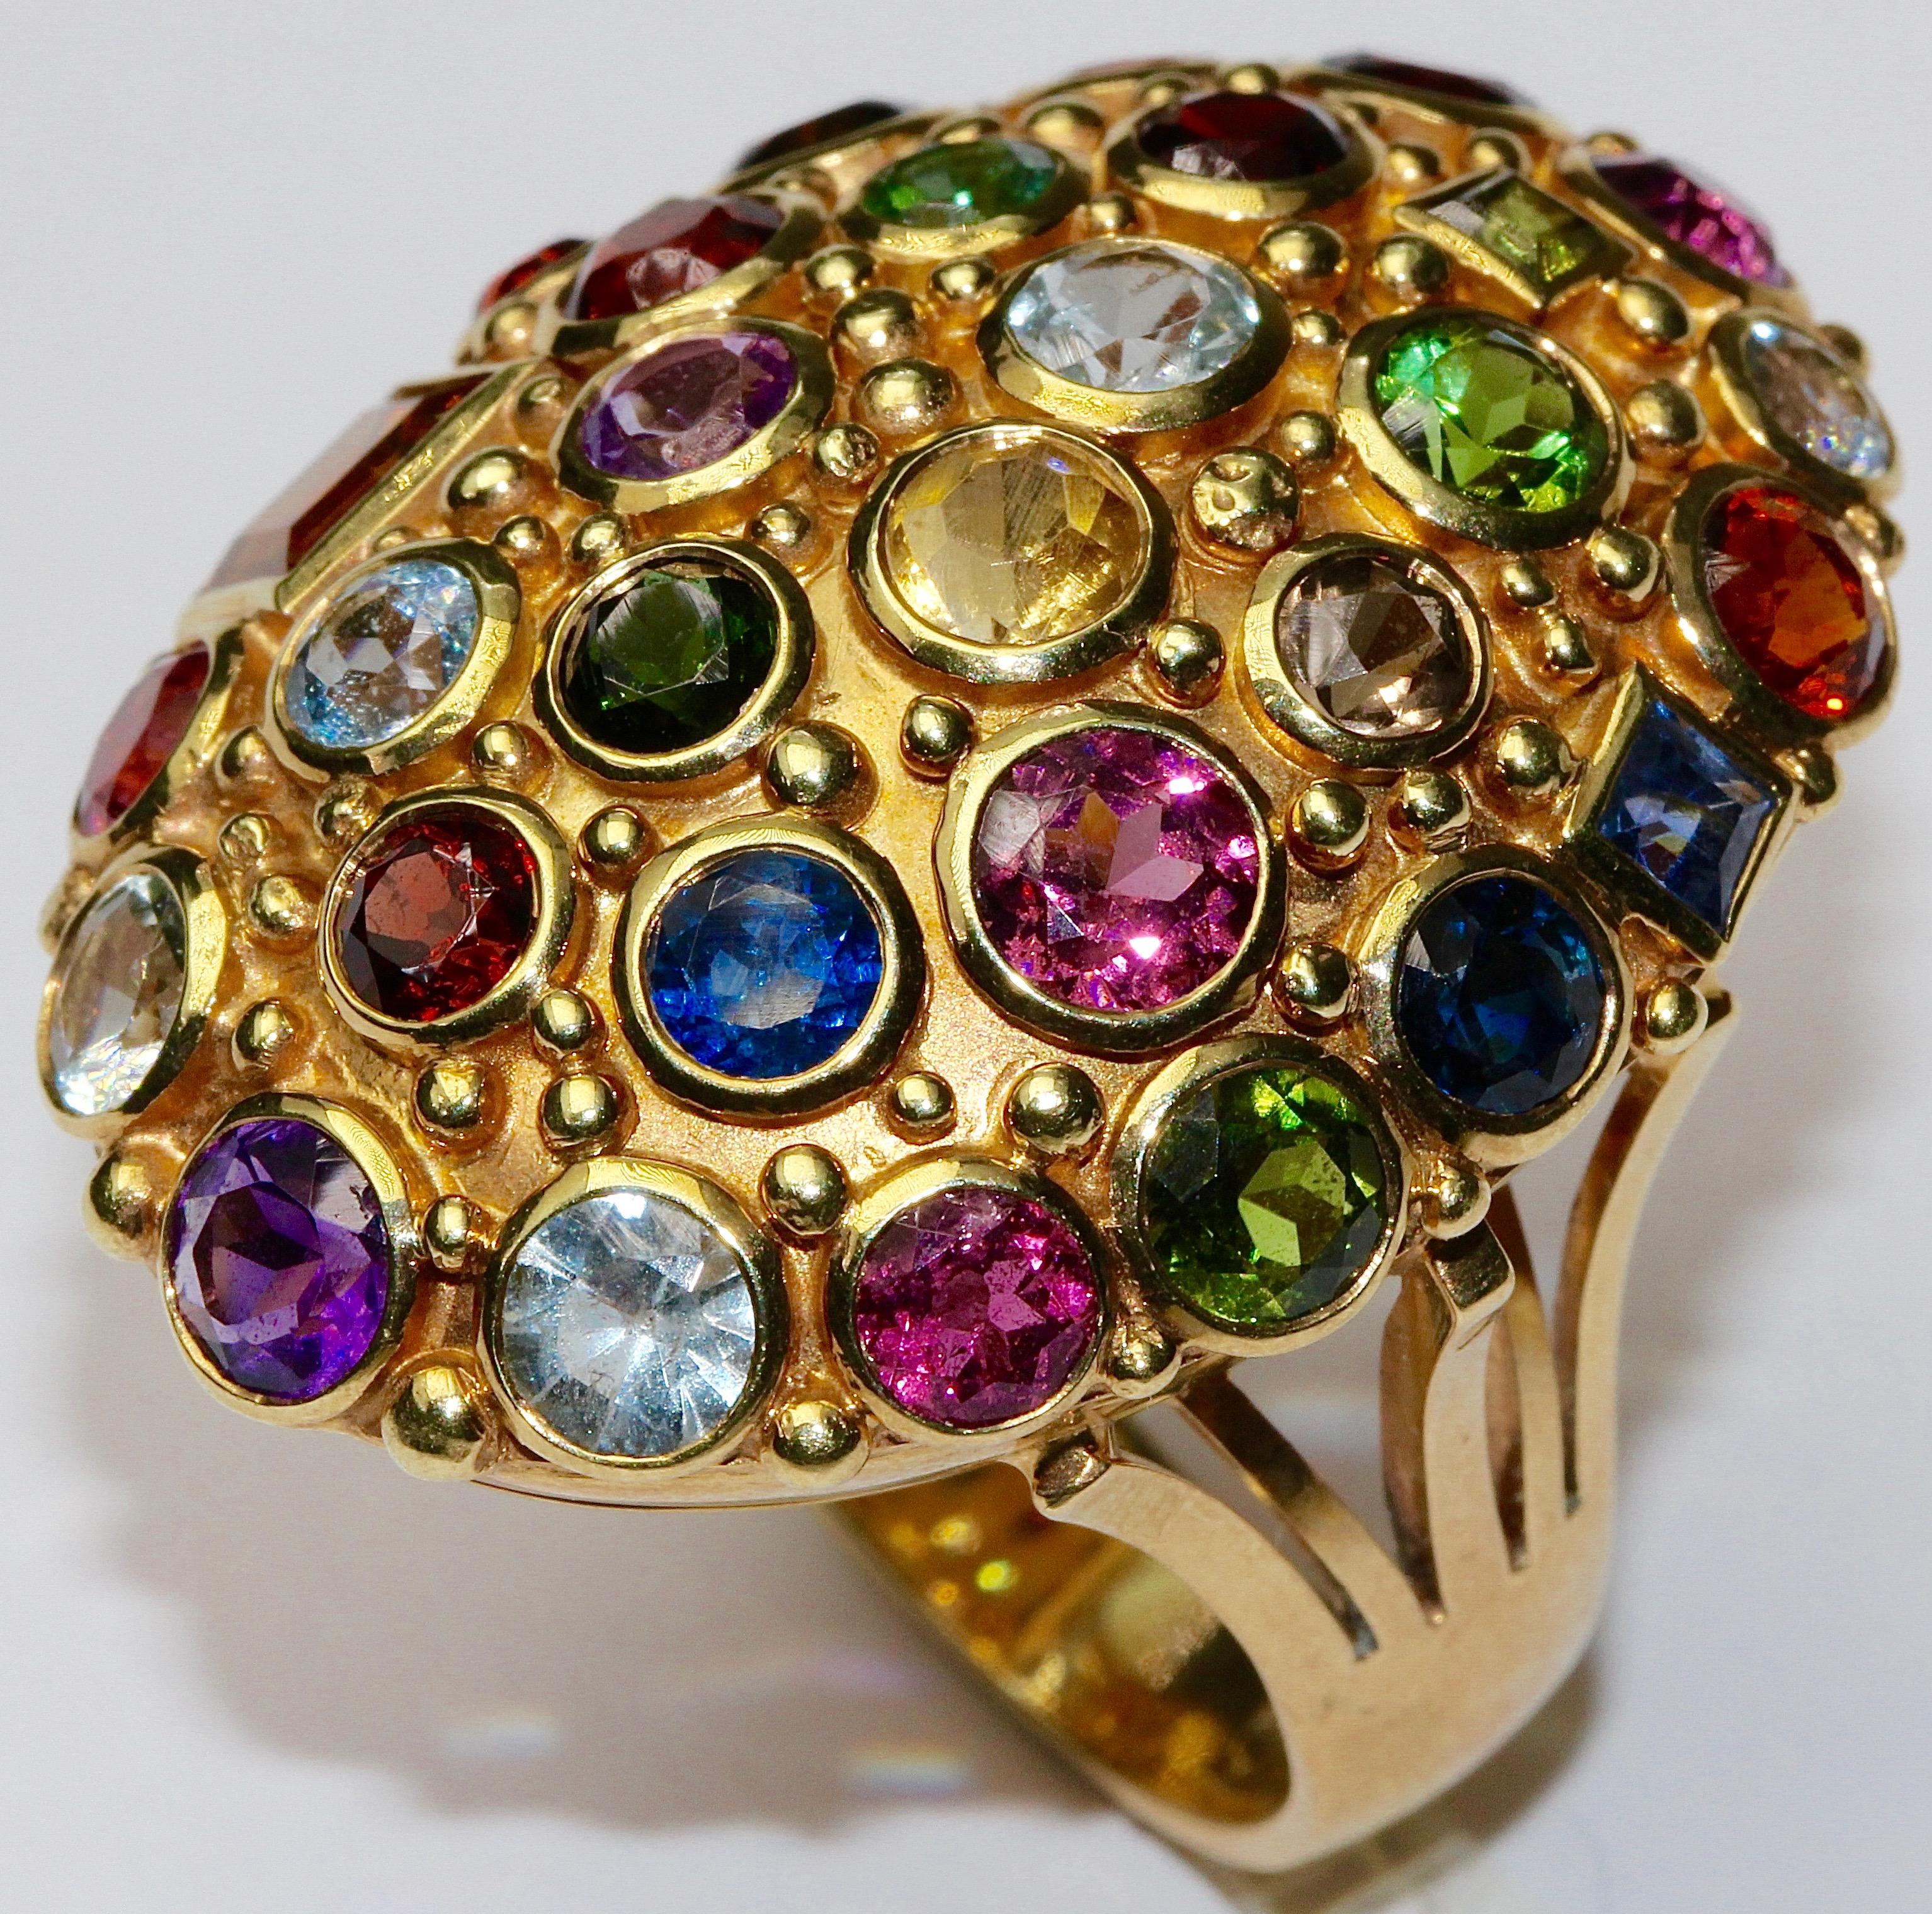 Beautiful and very fancy ladies cocktail ring. 14ct gold, hallmarked.
The ring is studded with several gemstones, e.g. with aquamarine, tourmaline, amethyst, smoky topaz, citrine, ruby, sapphire, blue topaz.

Finest goldsmith work.